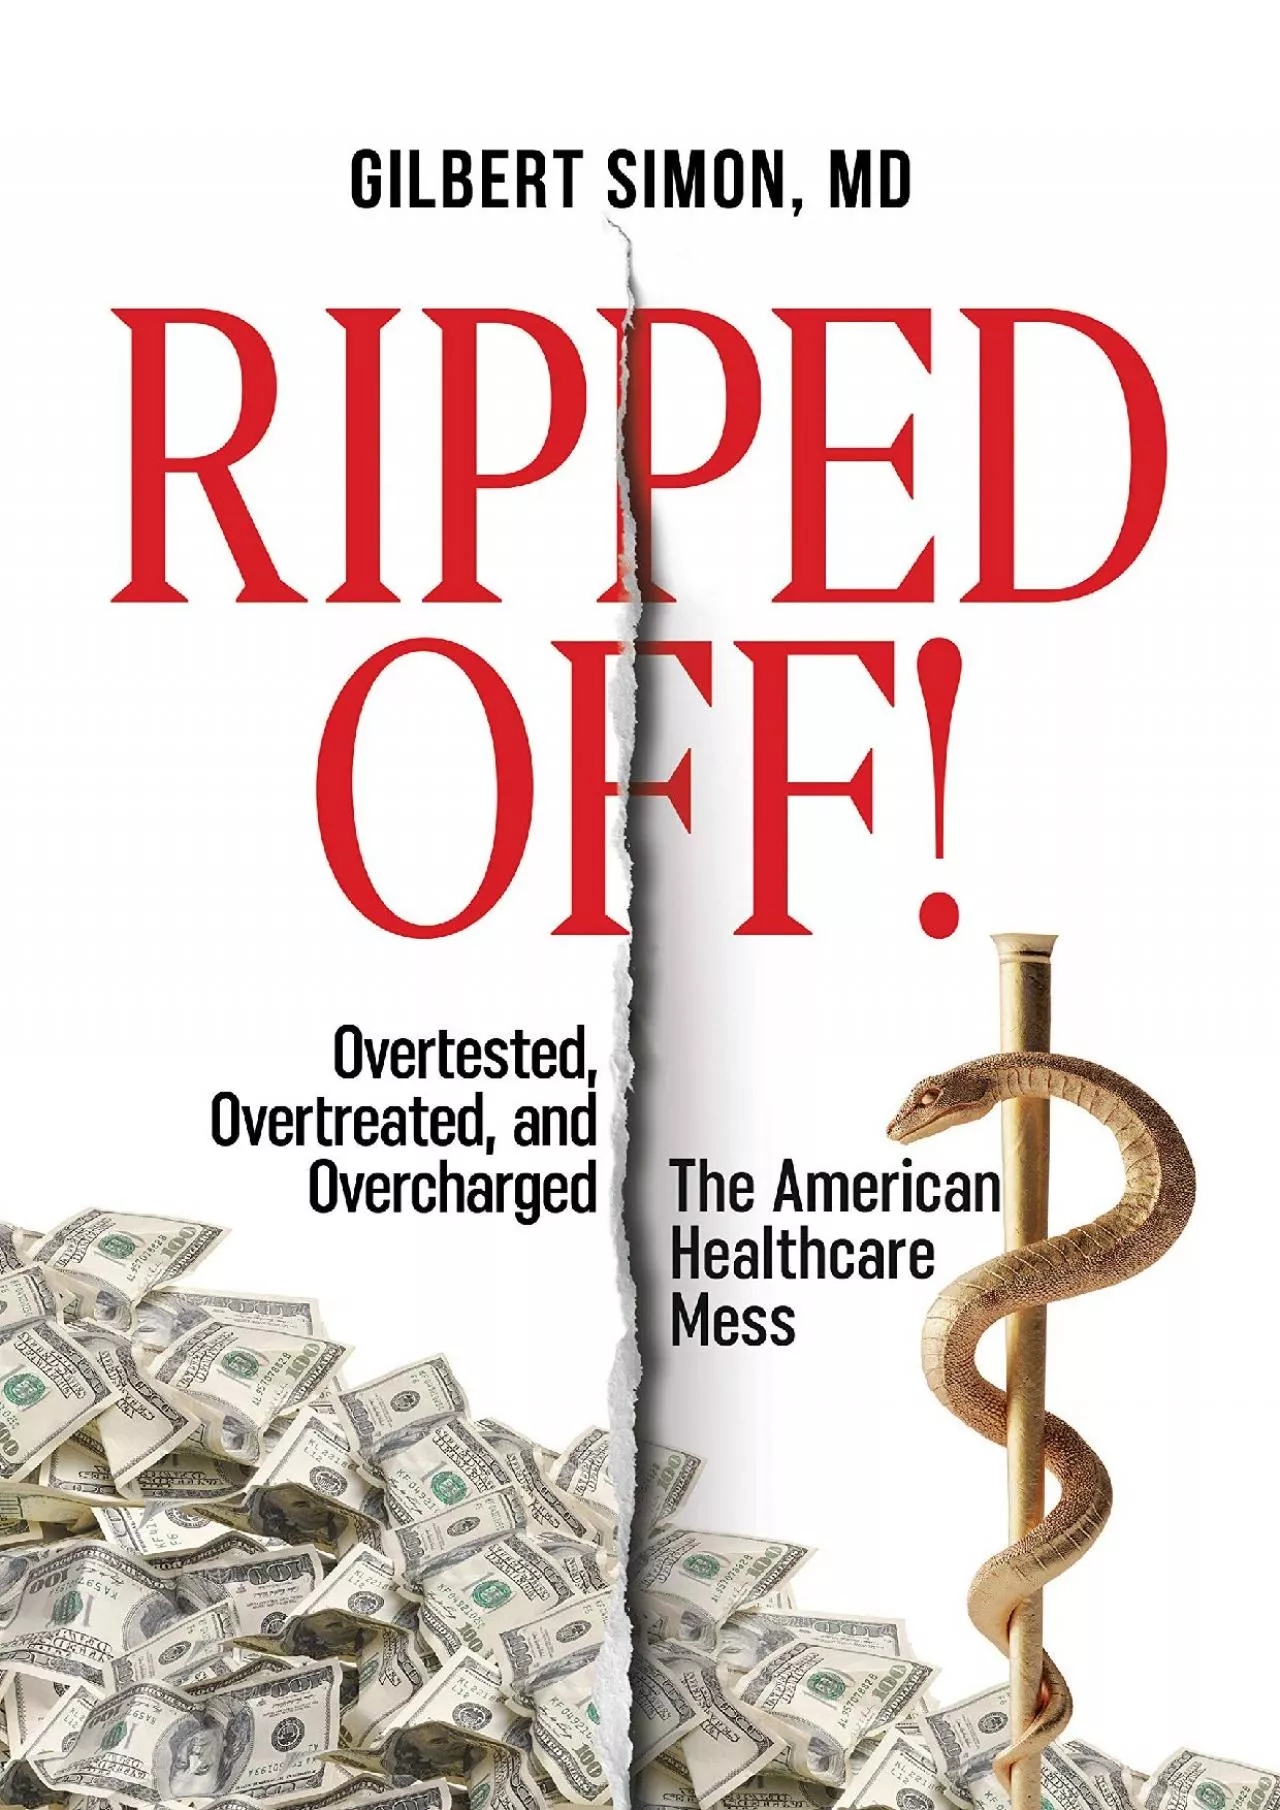 (EBOOK)-Ripped Off!: Overtested, Overtreated and Overcharged, the American Healthcare